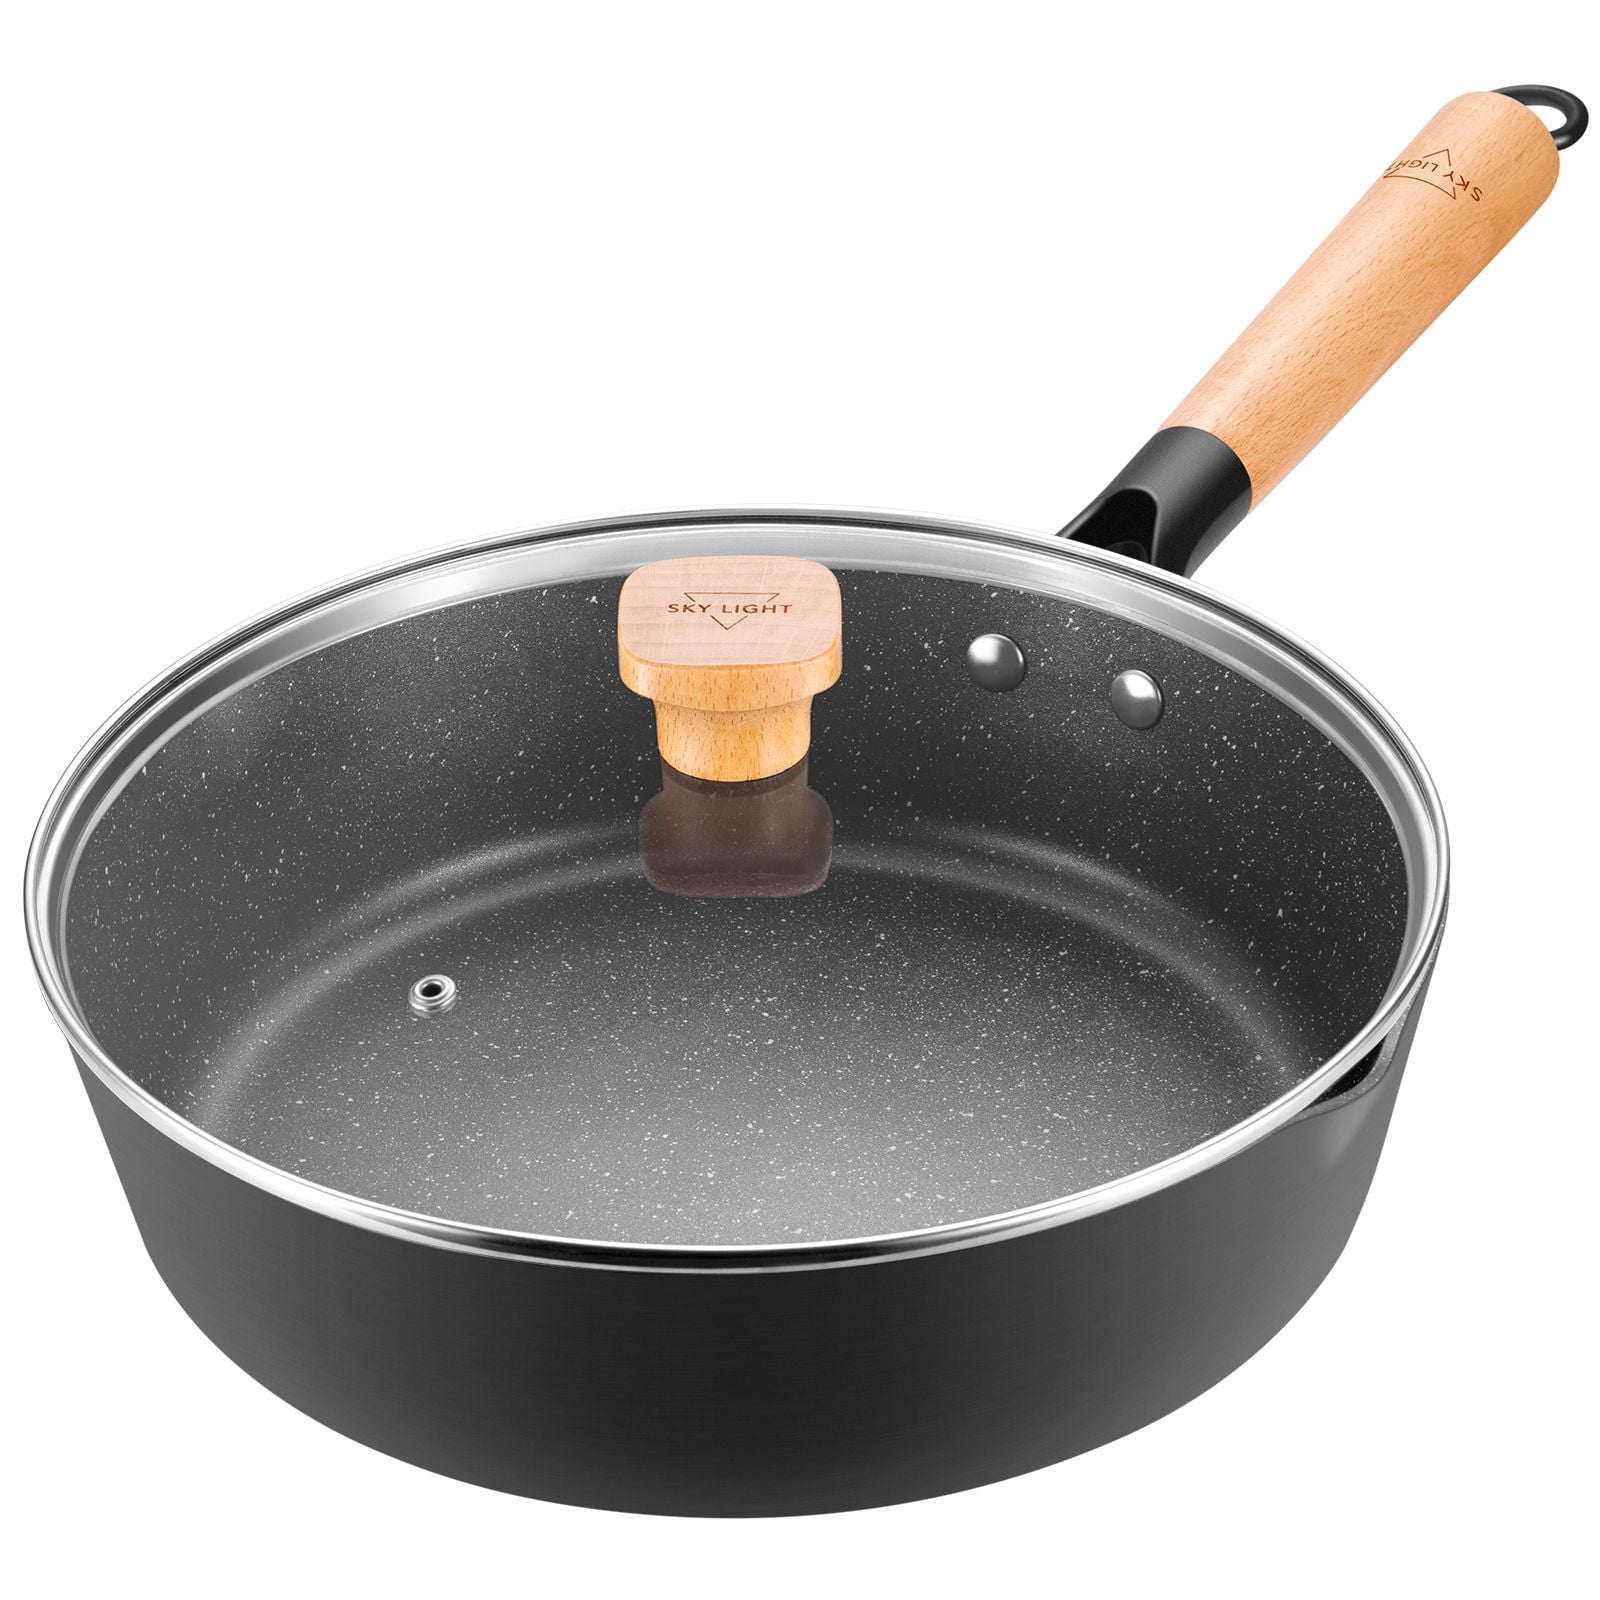 SKY LIGHT Carbon Steel Frying Pan, 10 inch Iron Skillet, No